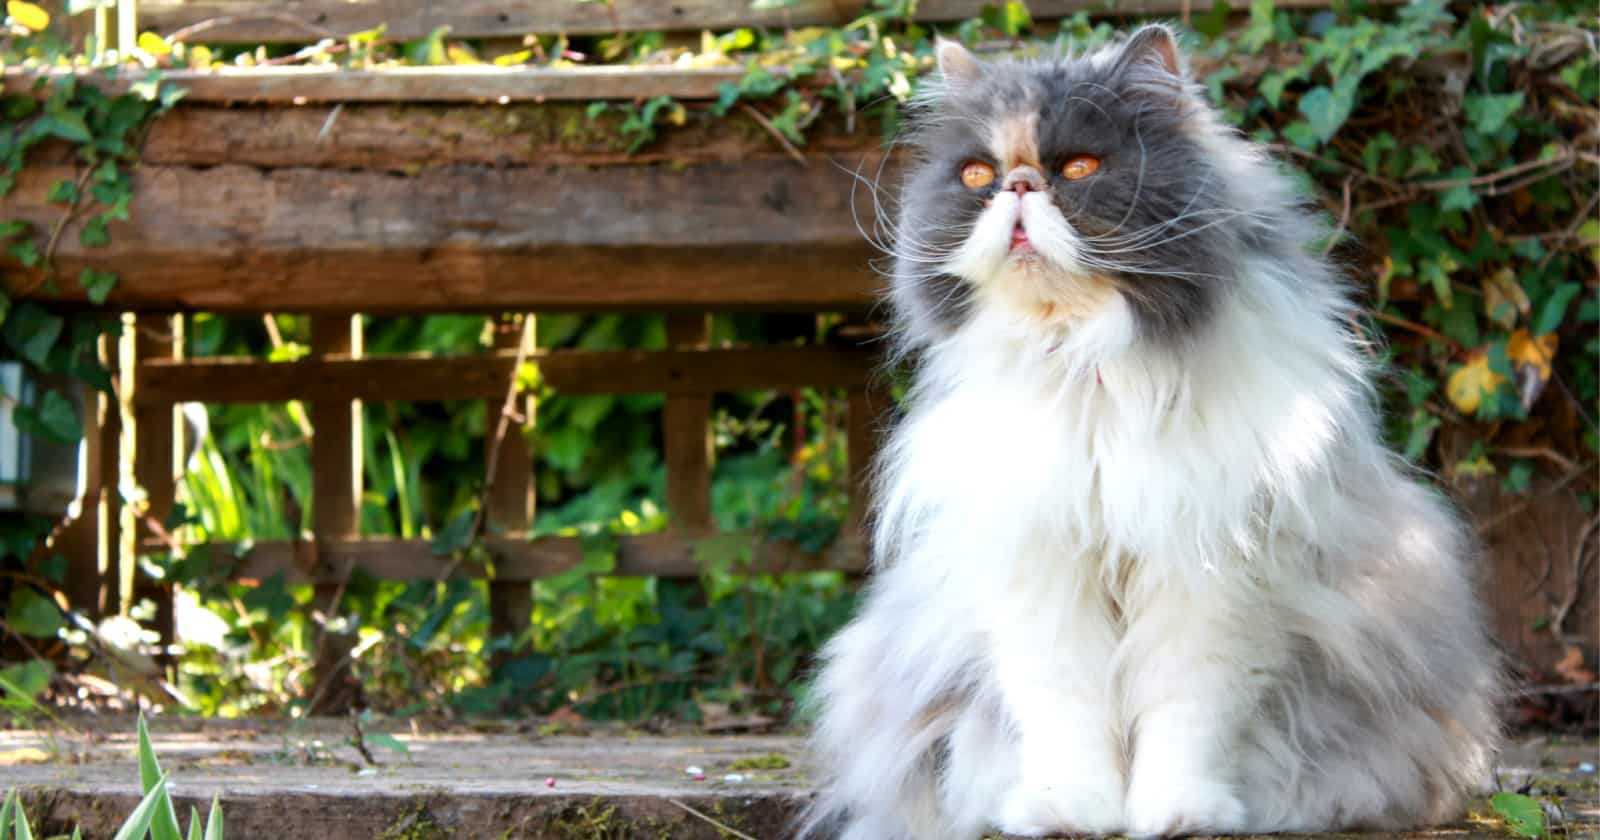 Are you wondering is there are cat breeds that can be left alone and won’t miss you too much when you’re gone? The Persian is one!